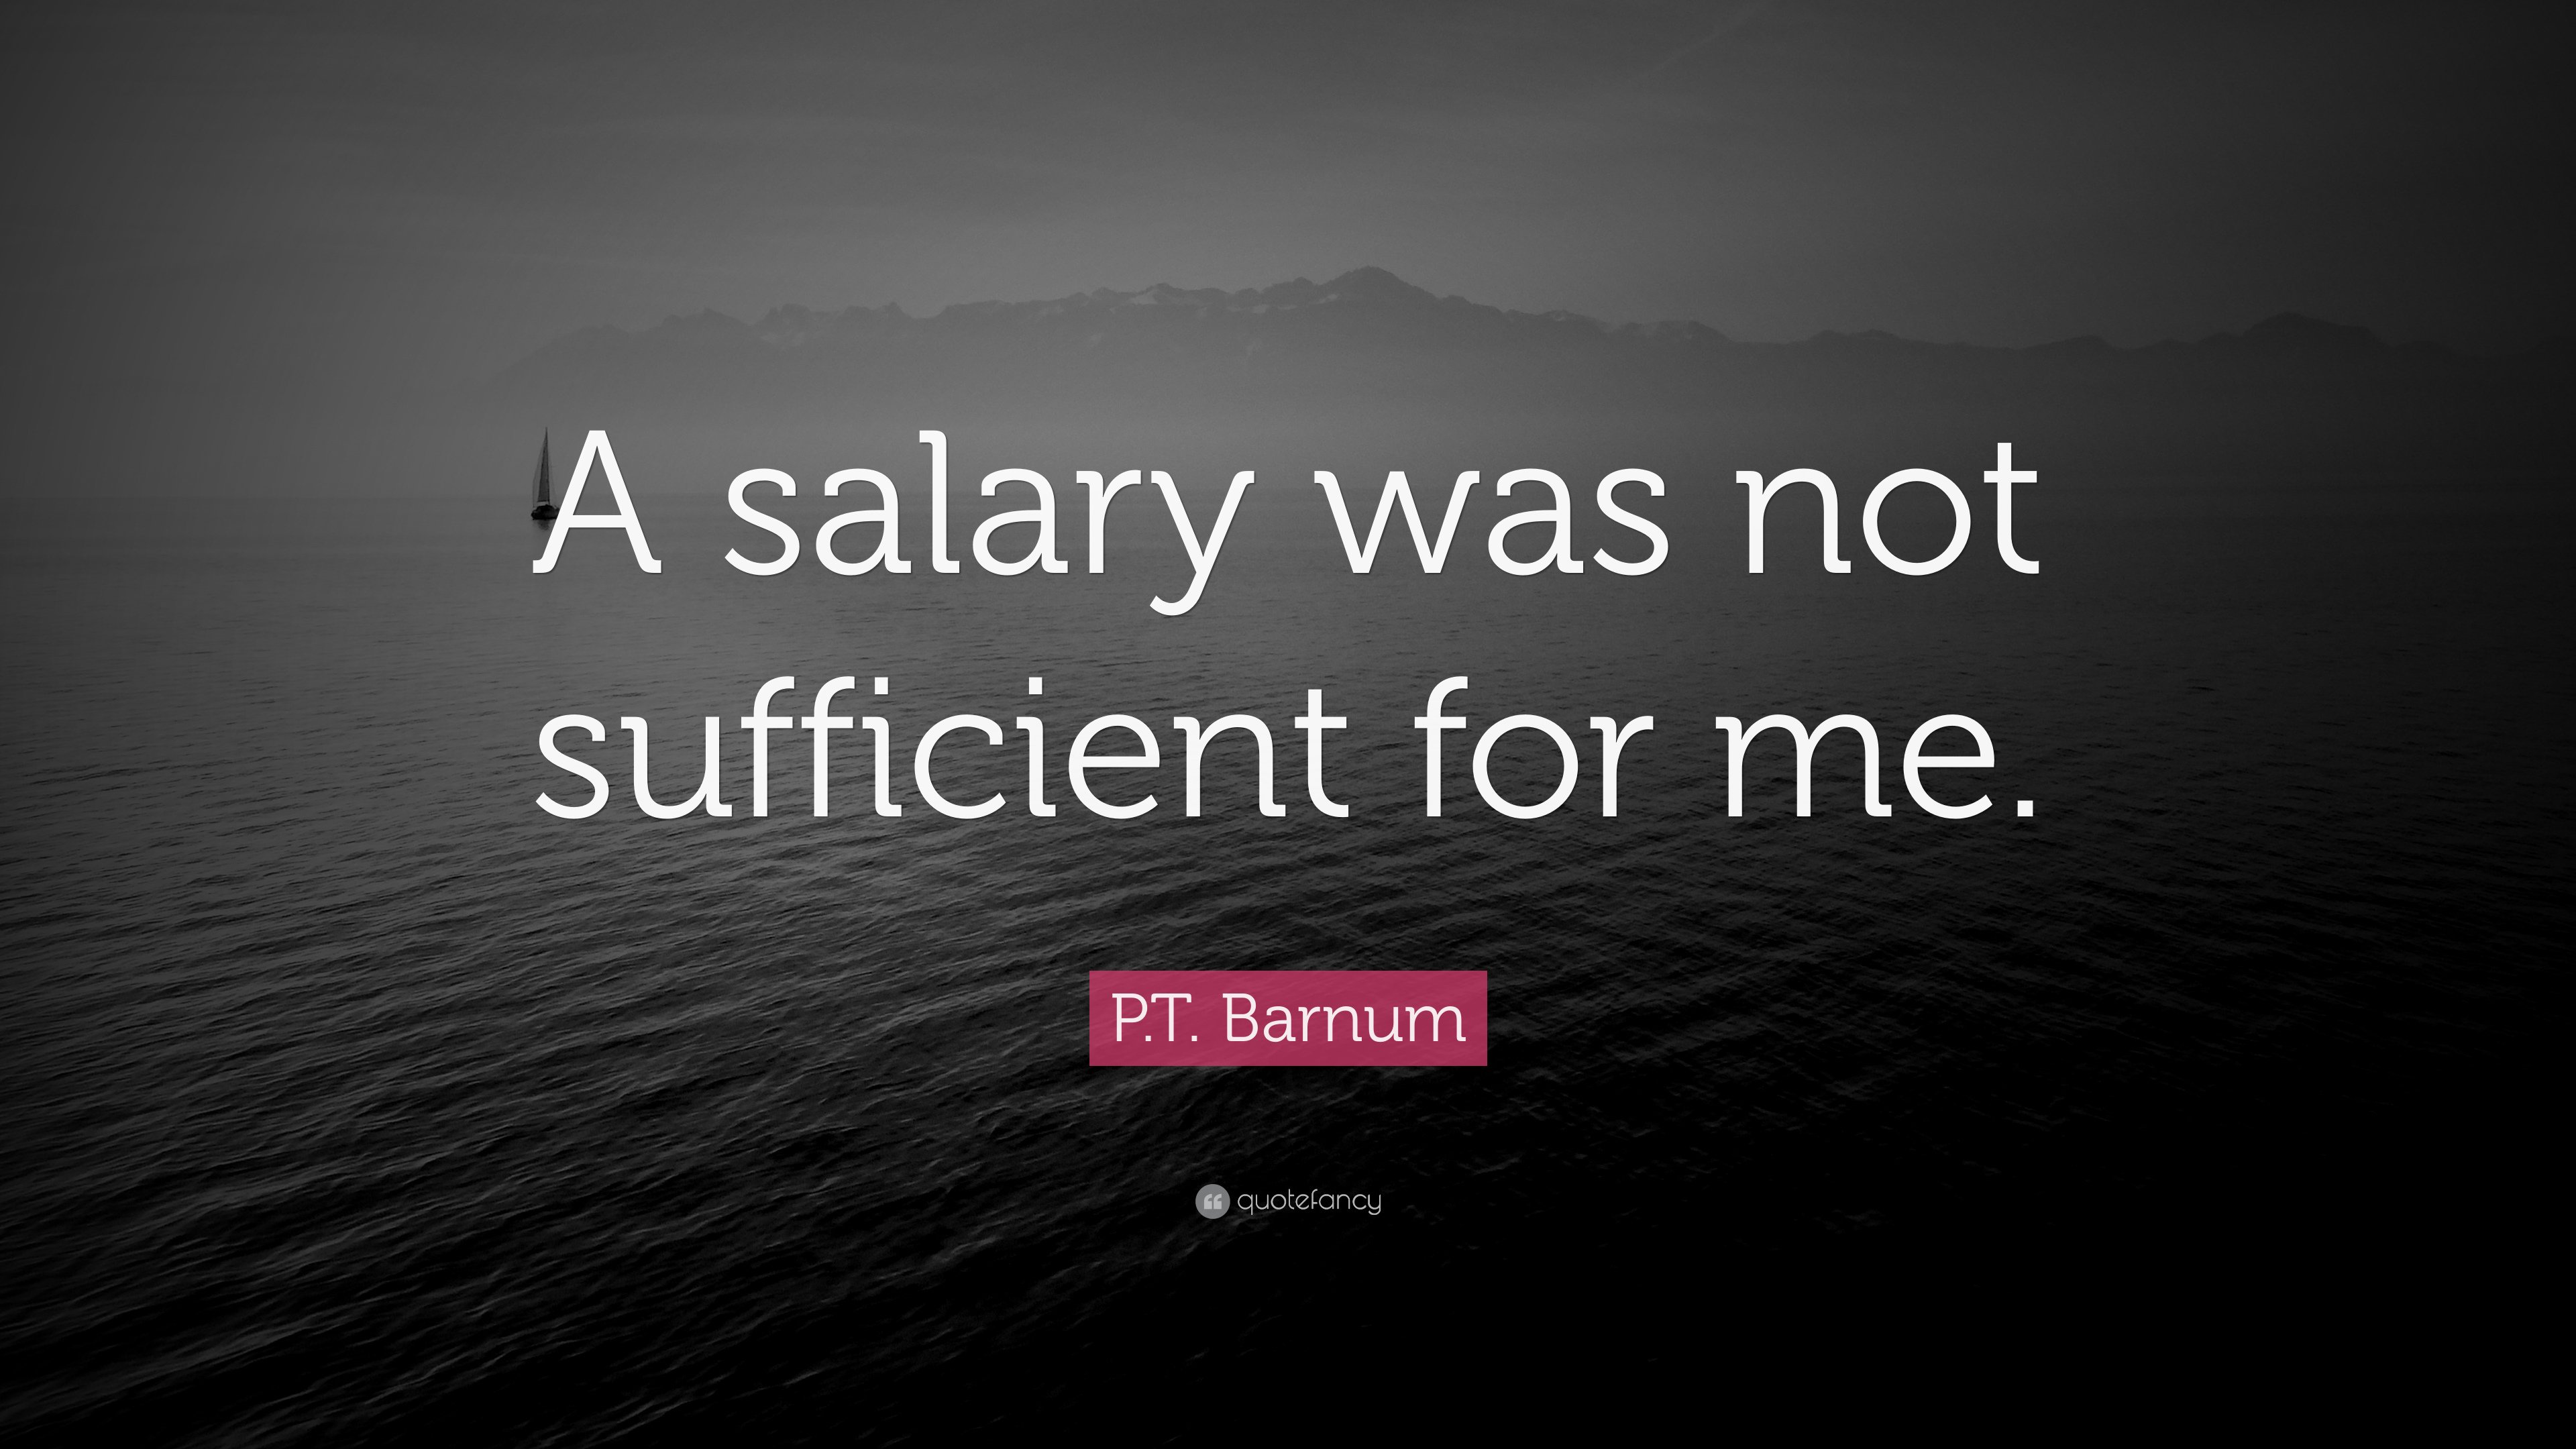 P.T. Barnum Quote: “A salary was not sufficient for me.”